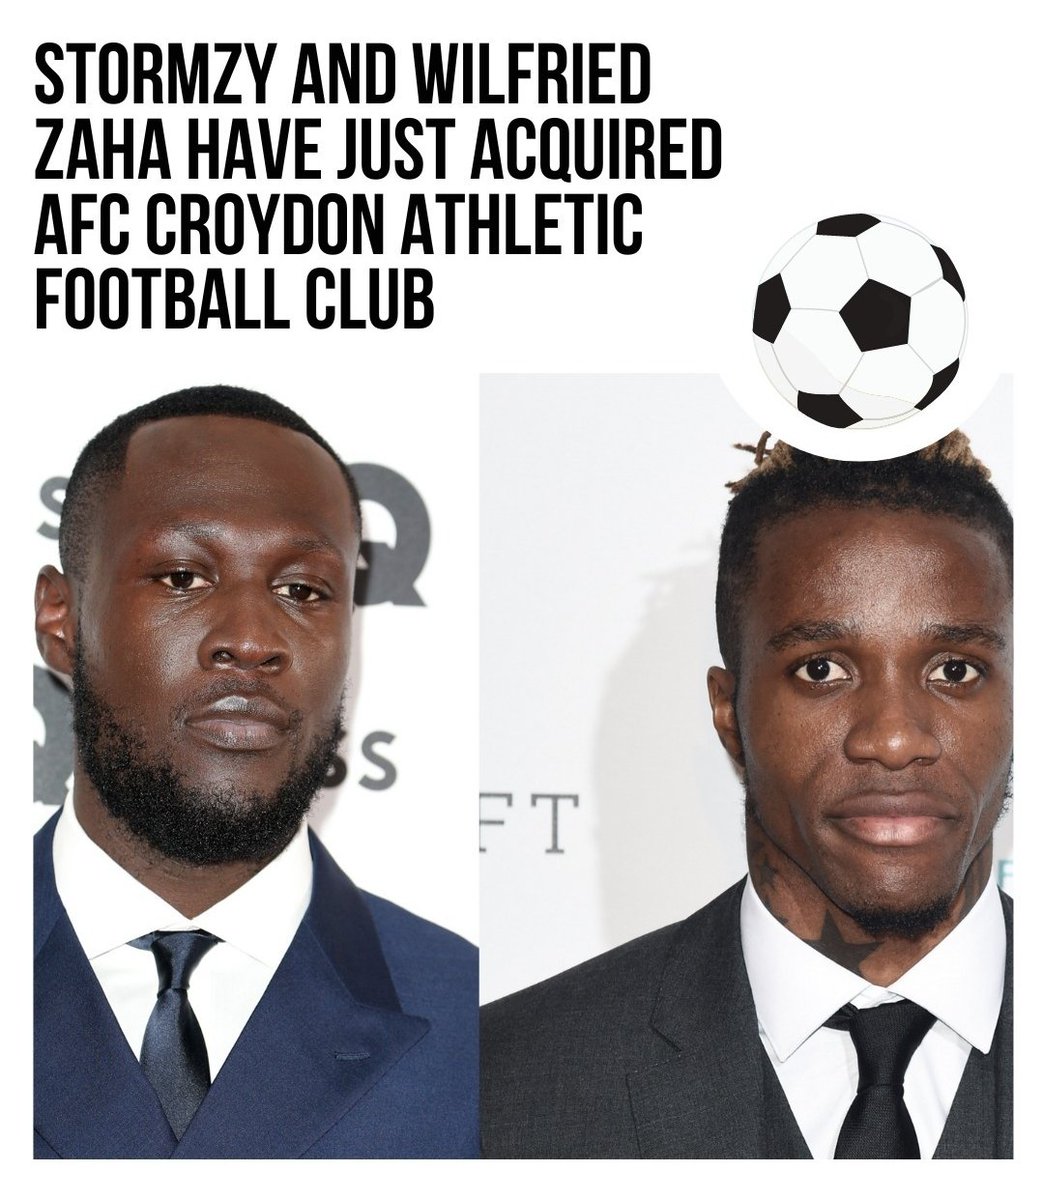 British Grime Superstar @stormzy and Crystal Palace  winger @Wilfred Zaha have just acquired  AFC Croydon Atlectic Football  Club. Congrats to them.
#stormzy  #zaha #afccroydonathletic